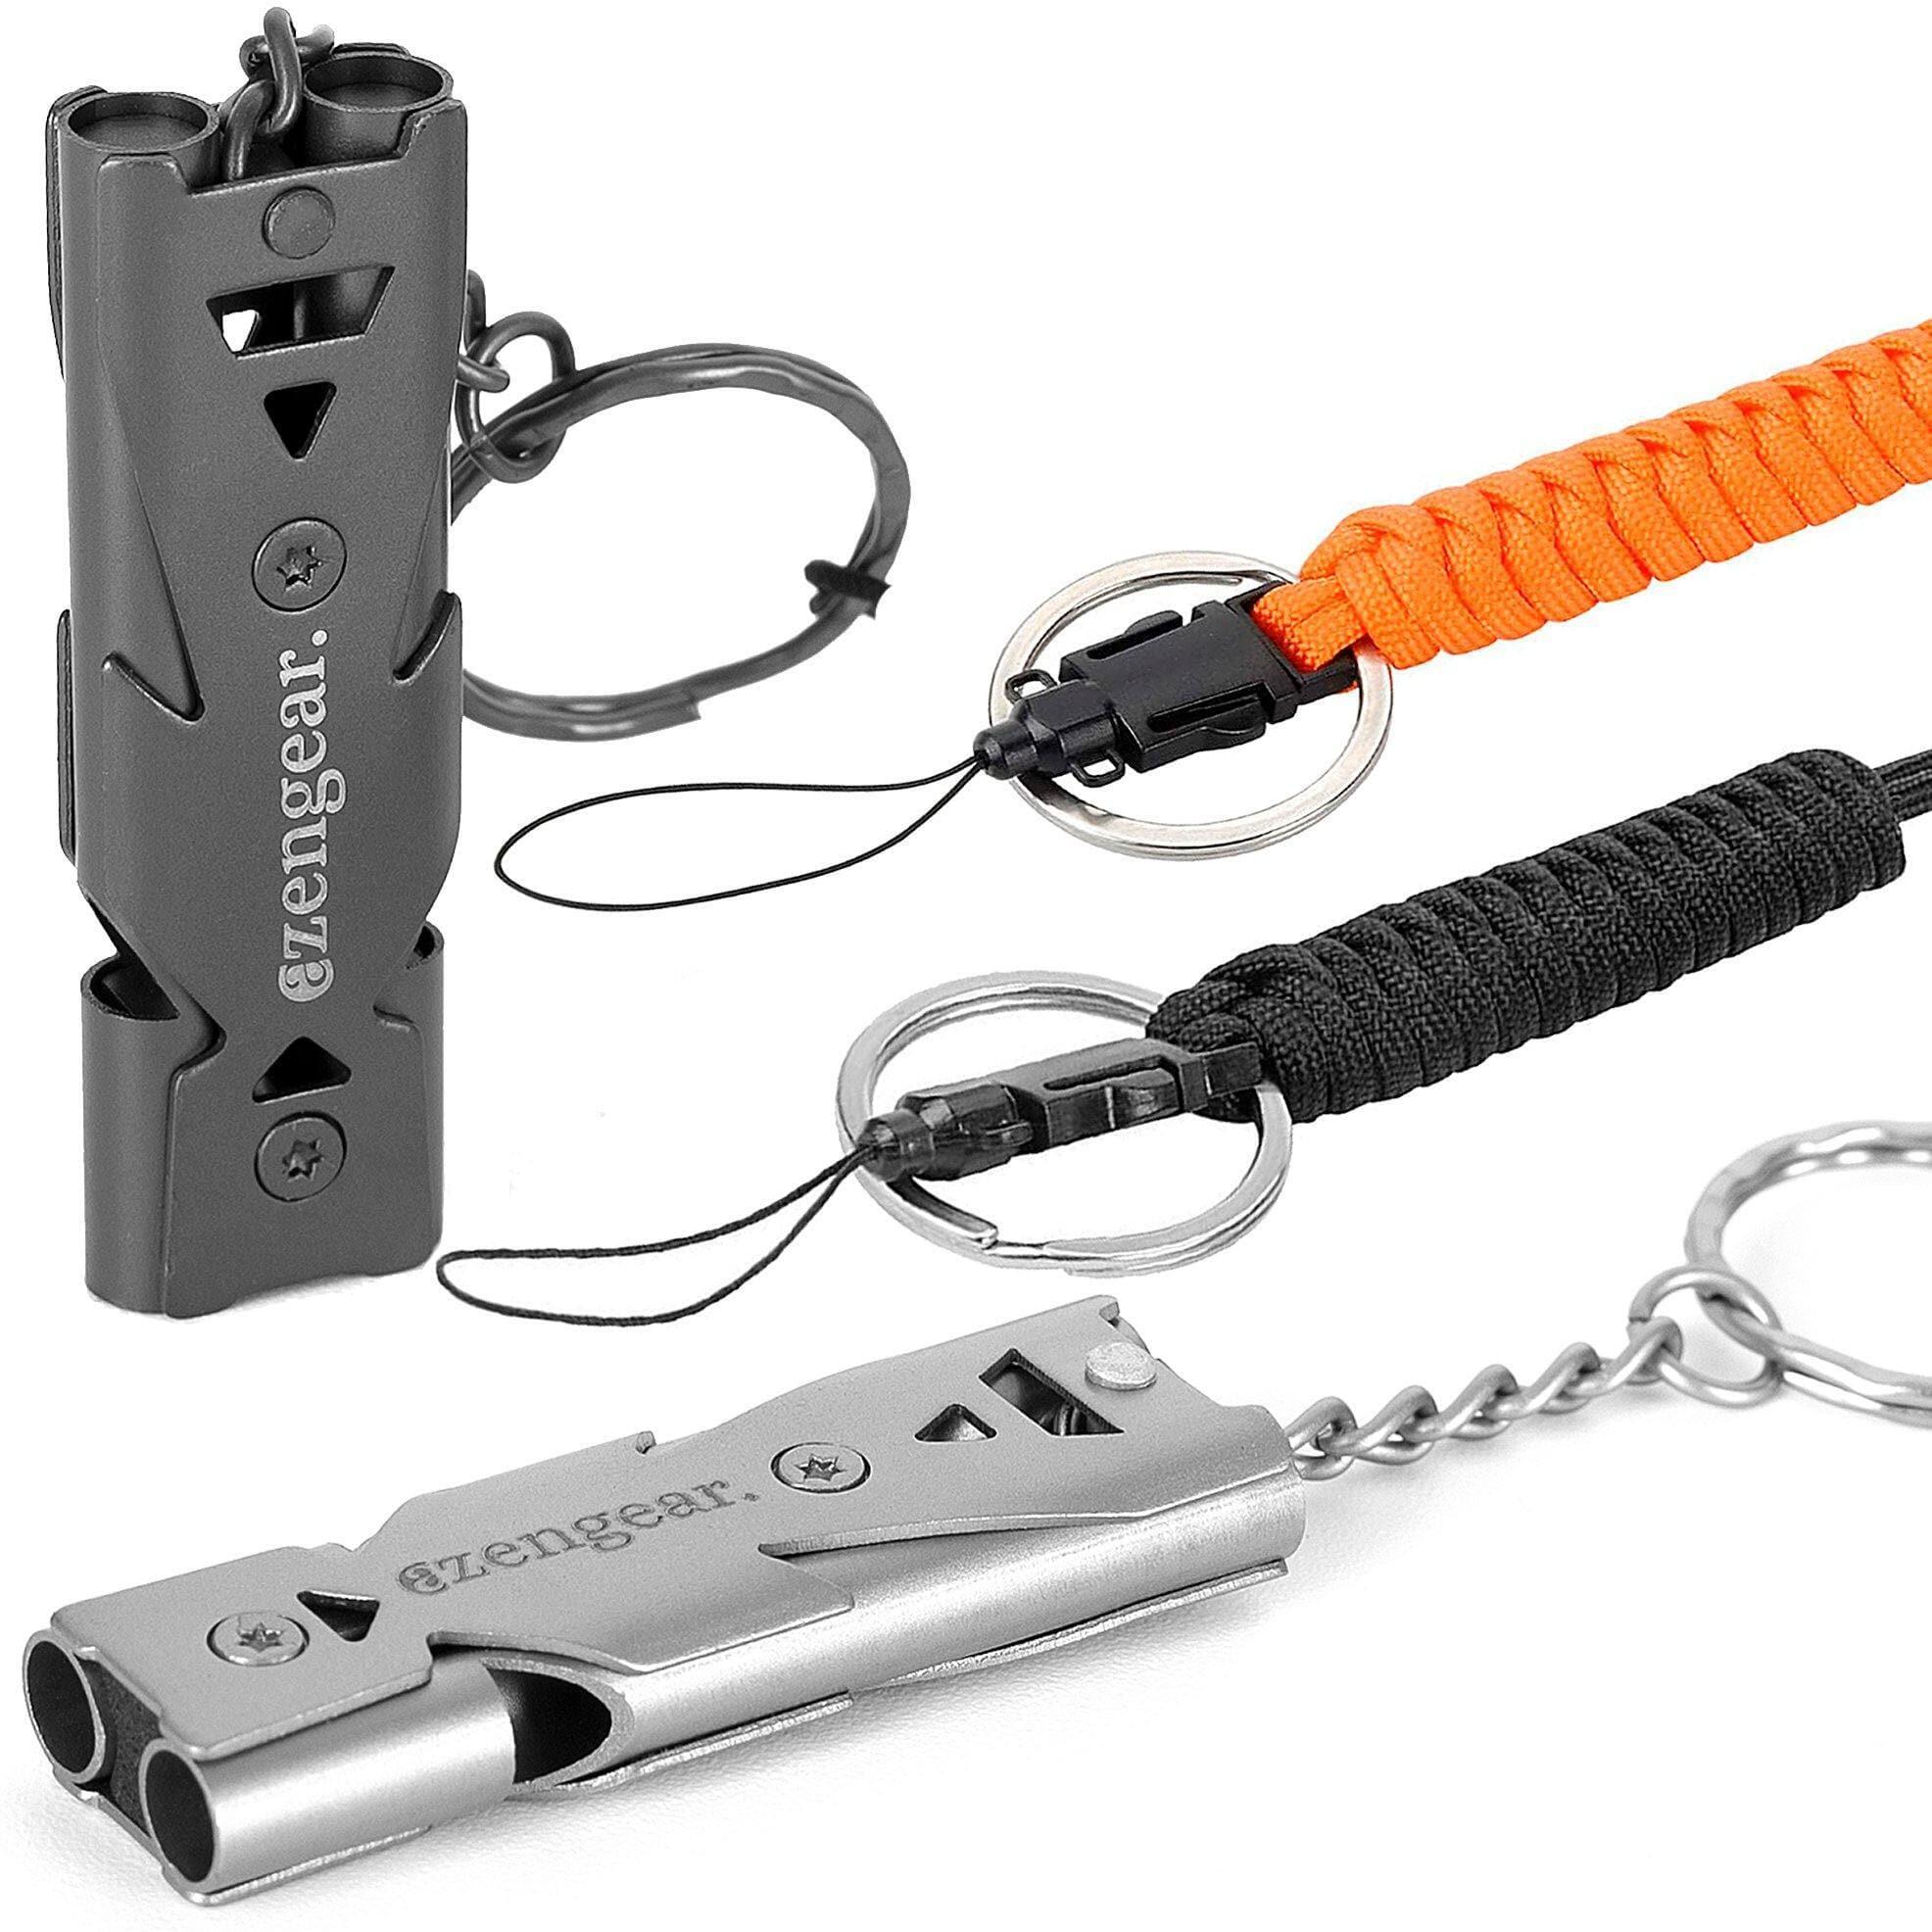 AZENGEAR Loud Stainless Steel Whistle With Paracord Lanyard String (2 Pack)